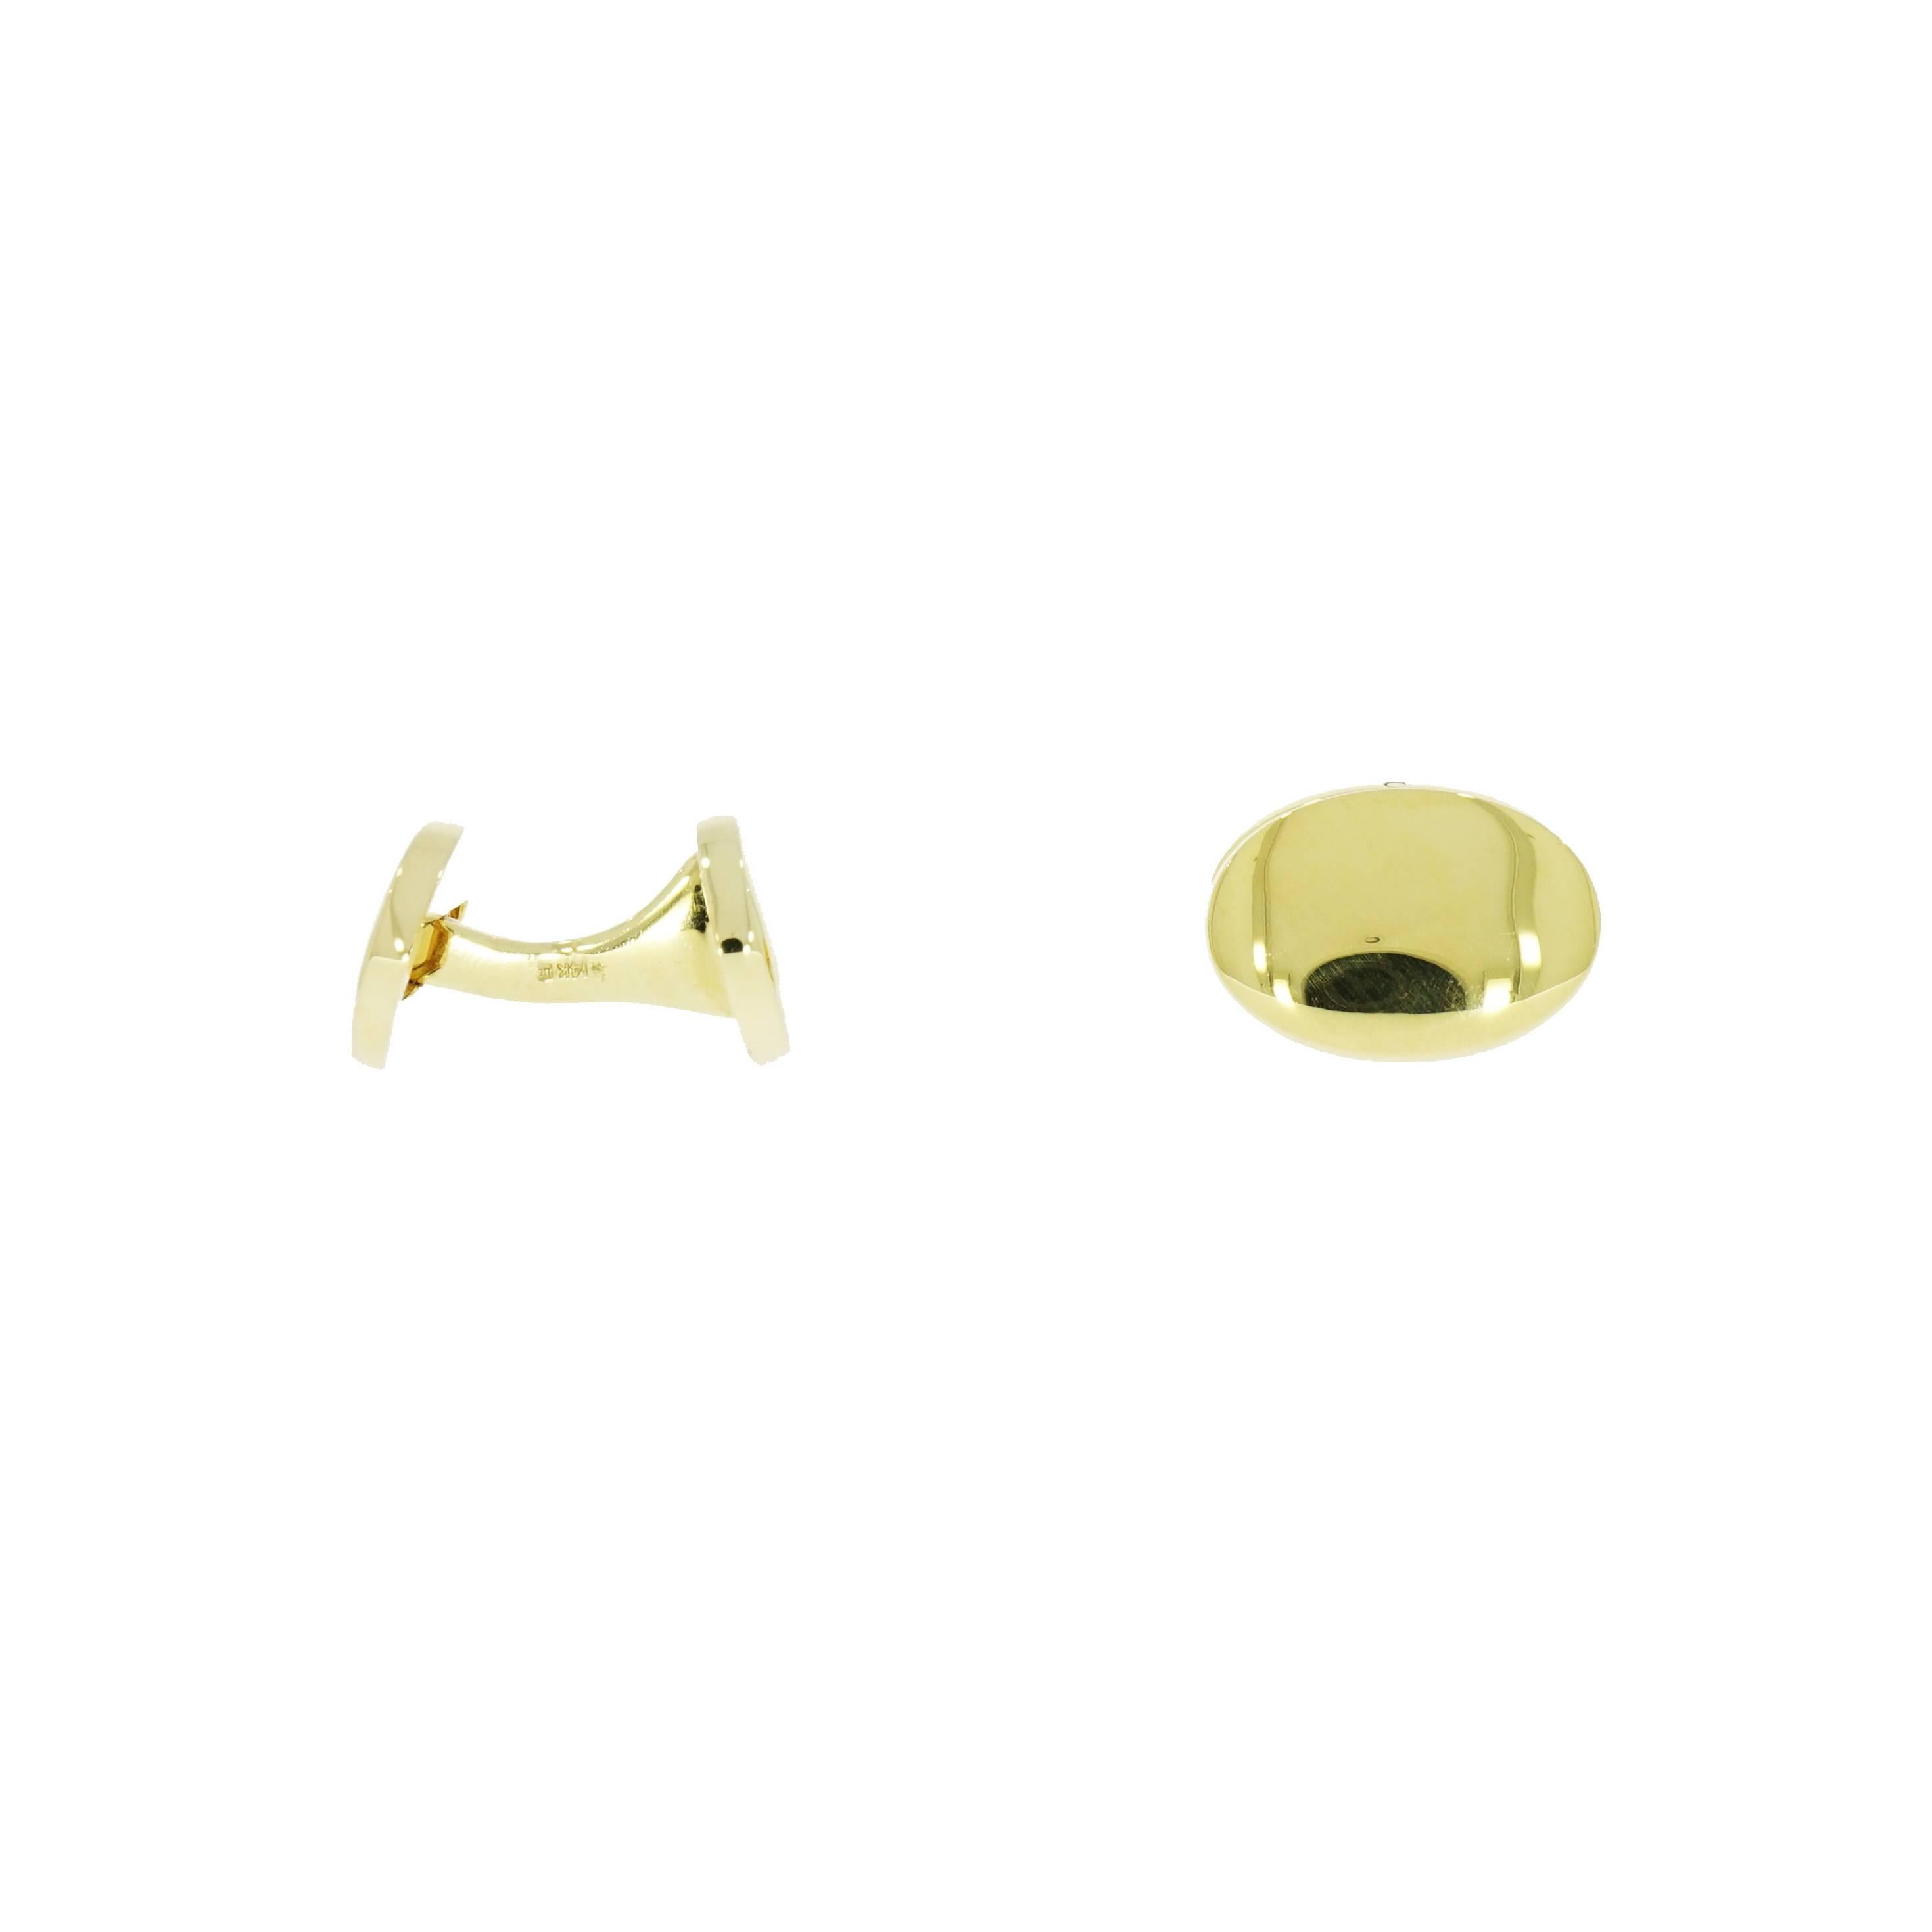 Cufflinks styles can varies as their wearers... Classic styles like this one can be personalize with family crest, monogram initials, even an image imprint.
Meticulously crafted in 14k yellow gold, this solid double sided cufflinks weighs 27.37